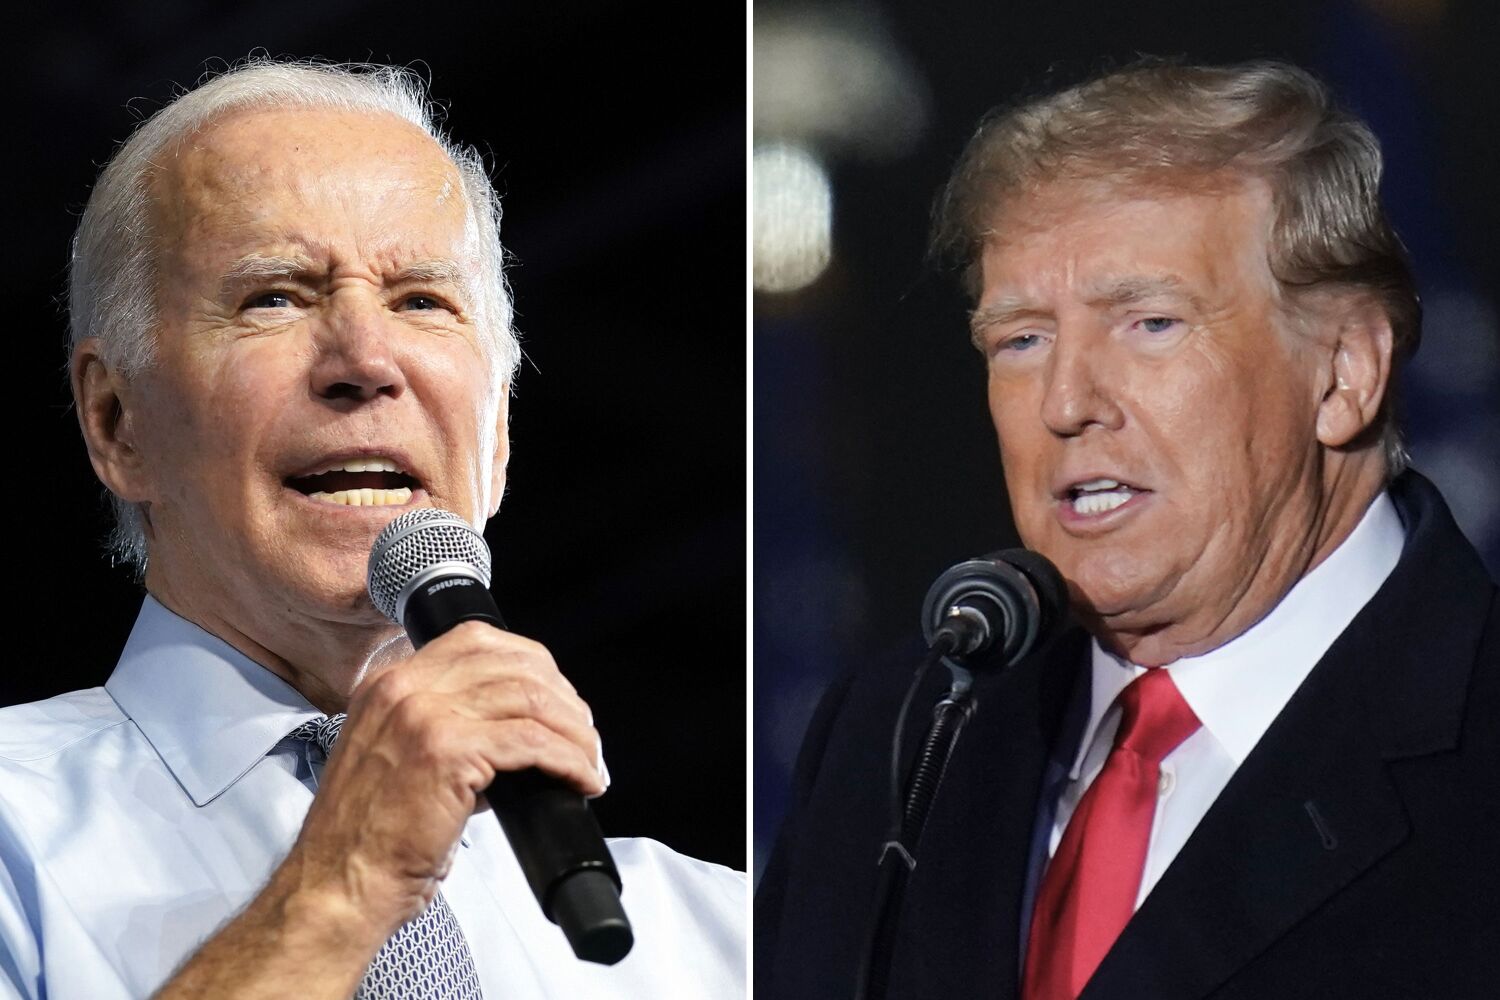 Column: If voters don't want Biden or Trump, the system is broken